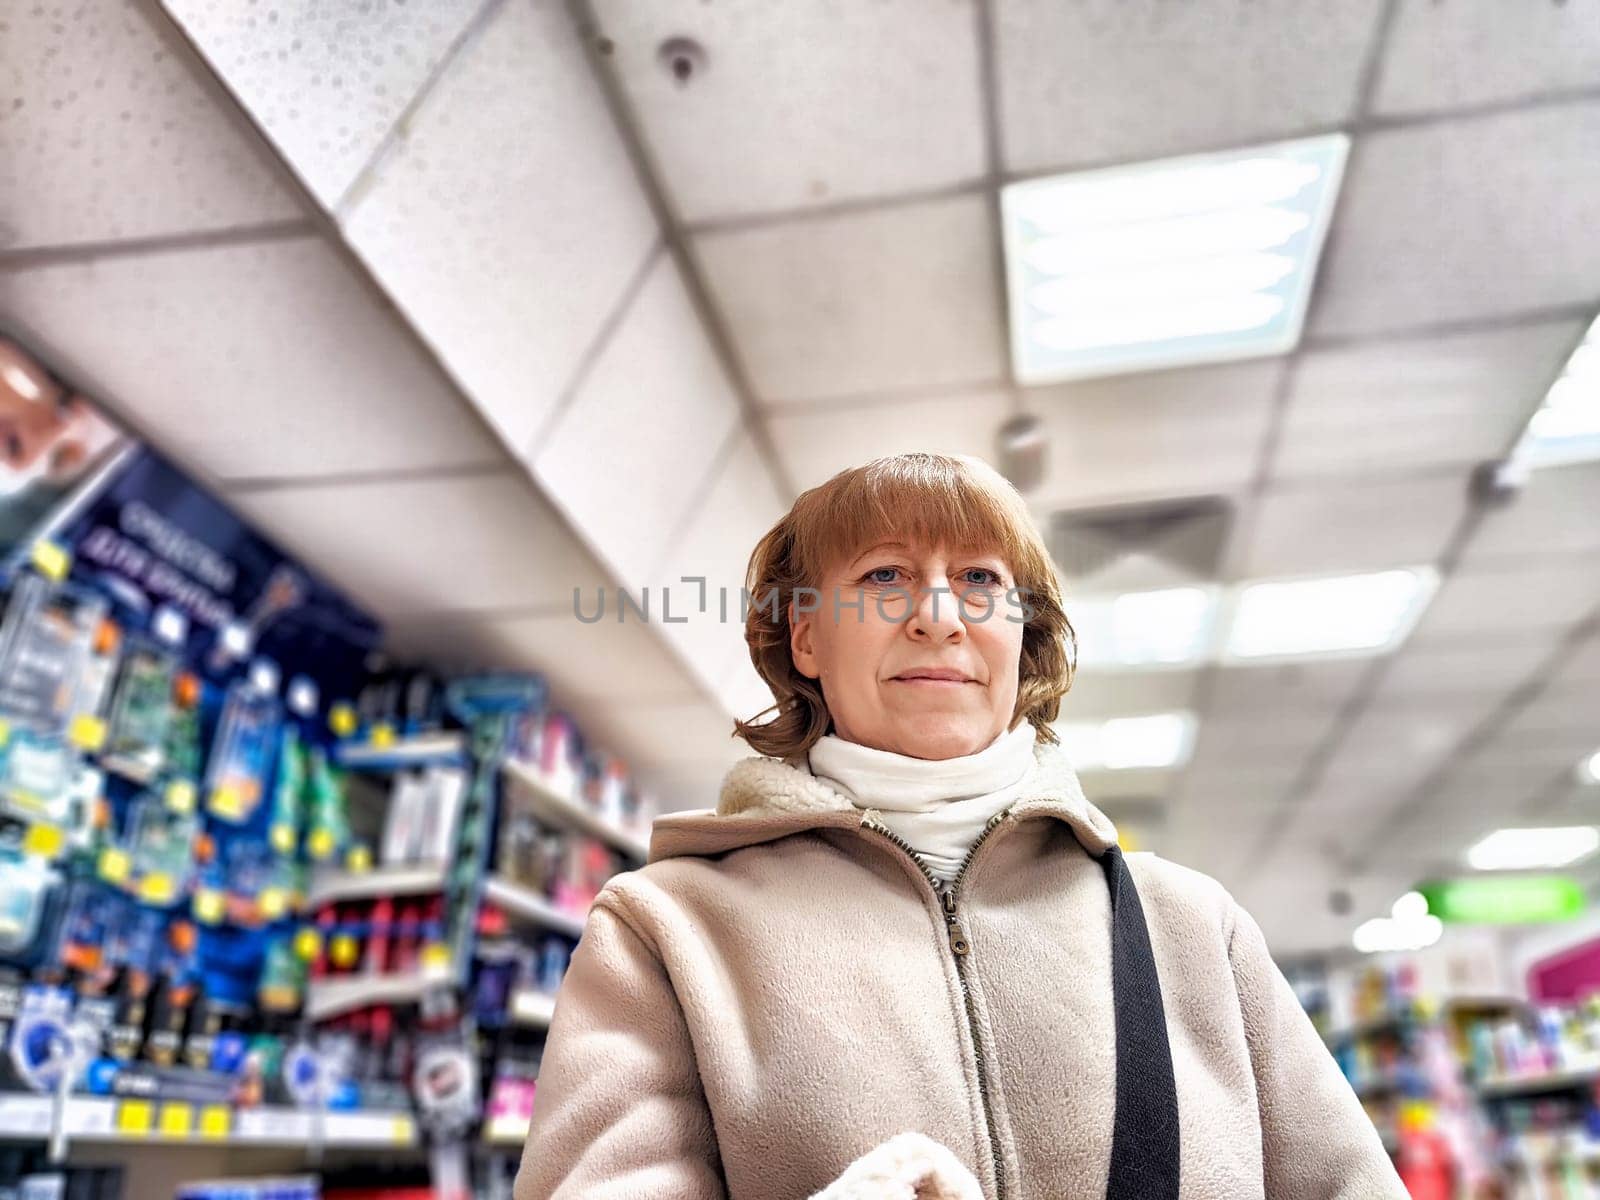 Middle-Aged Woman Shopping for Care Products at a Cosmetics Store. A woman browsing care products in a well-stocked cosmetics aisle by keleny